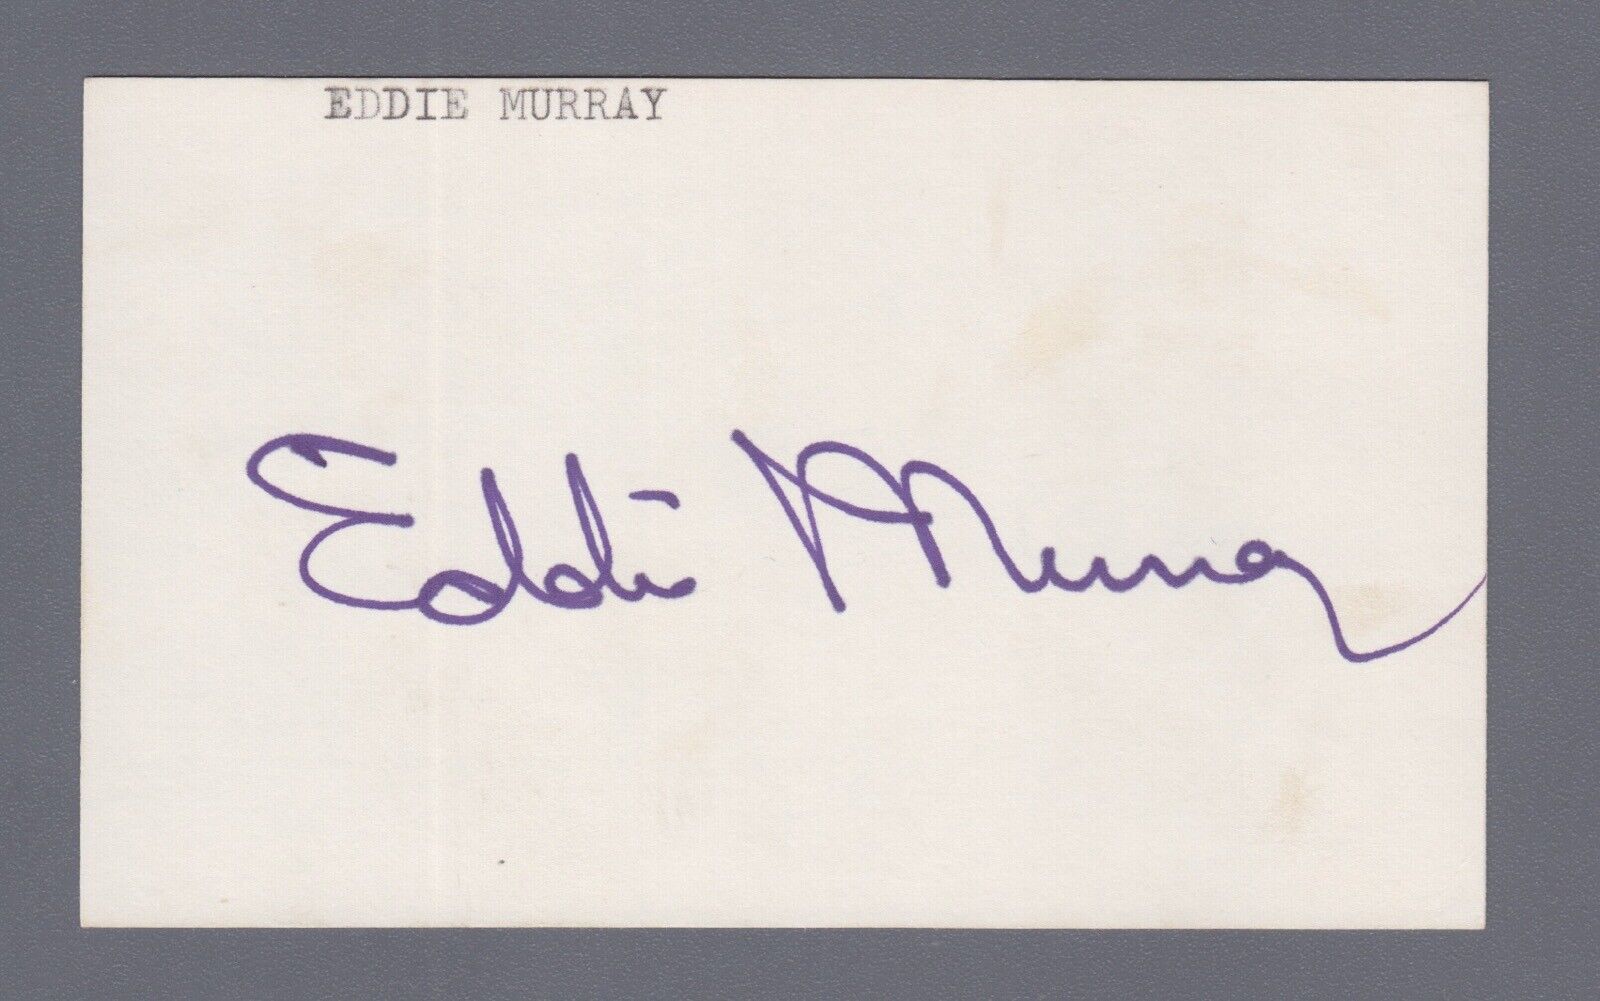 Eddie Murray Signed Index Card with B&E Hologram